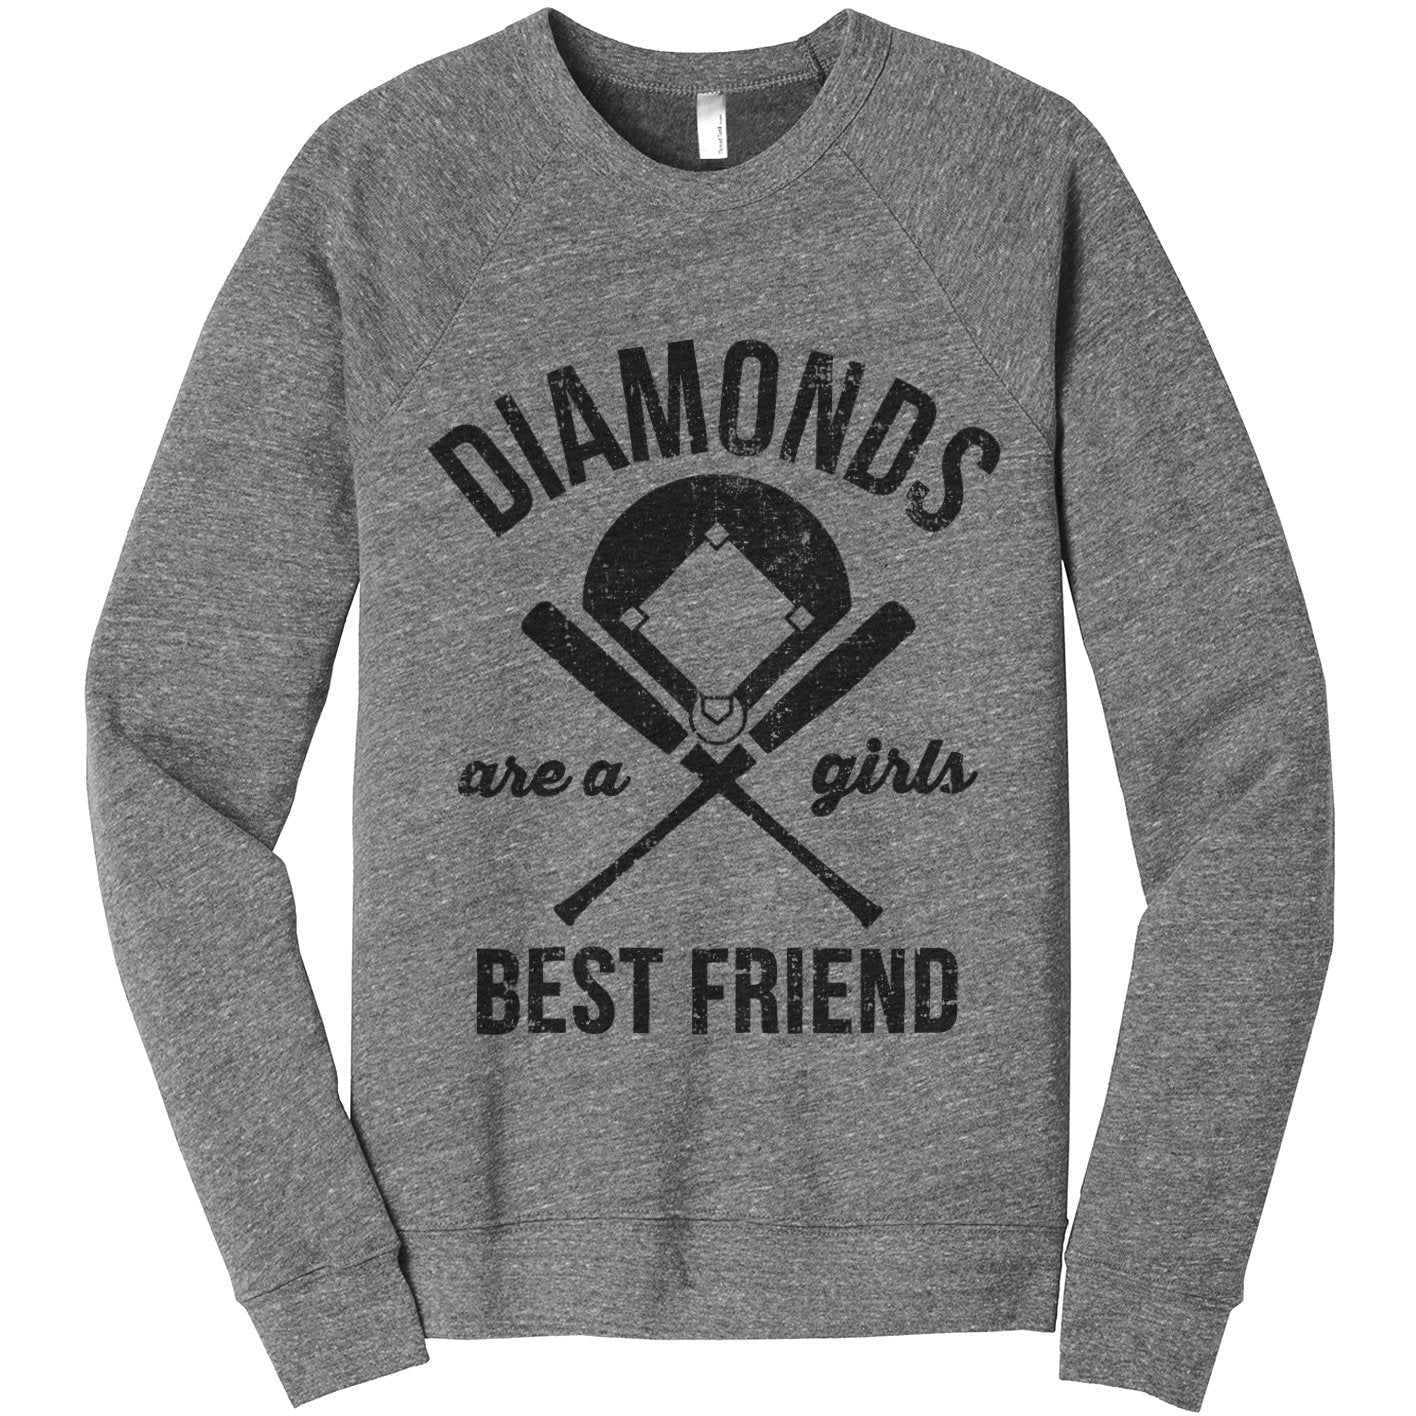 Diamonds Are A Girls Best Friend - Thread Tank | Stories You Can Wear | T-Shirts, Tank Tops and Sweatshirts